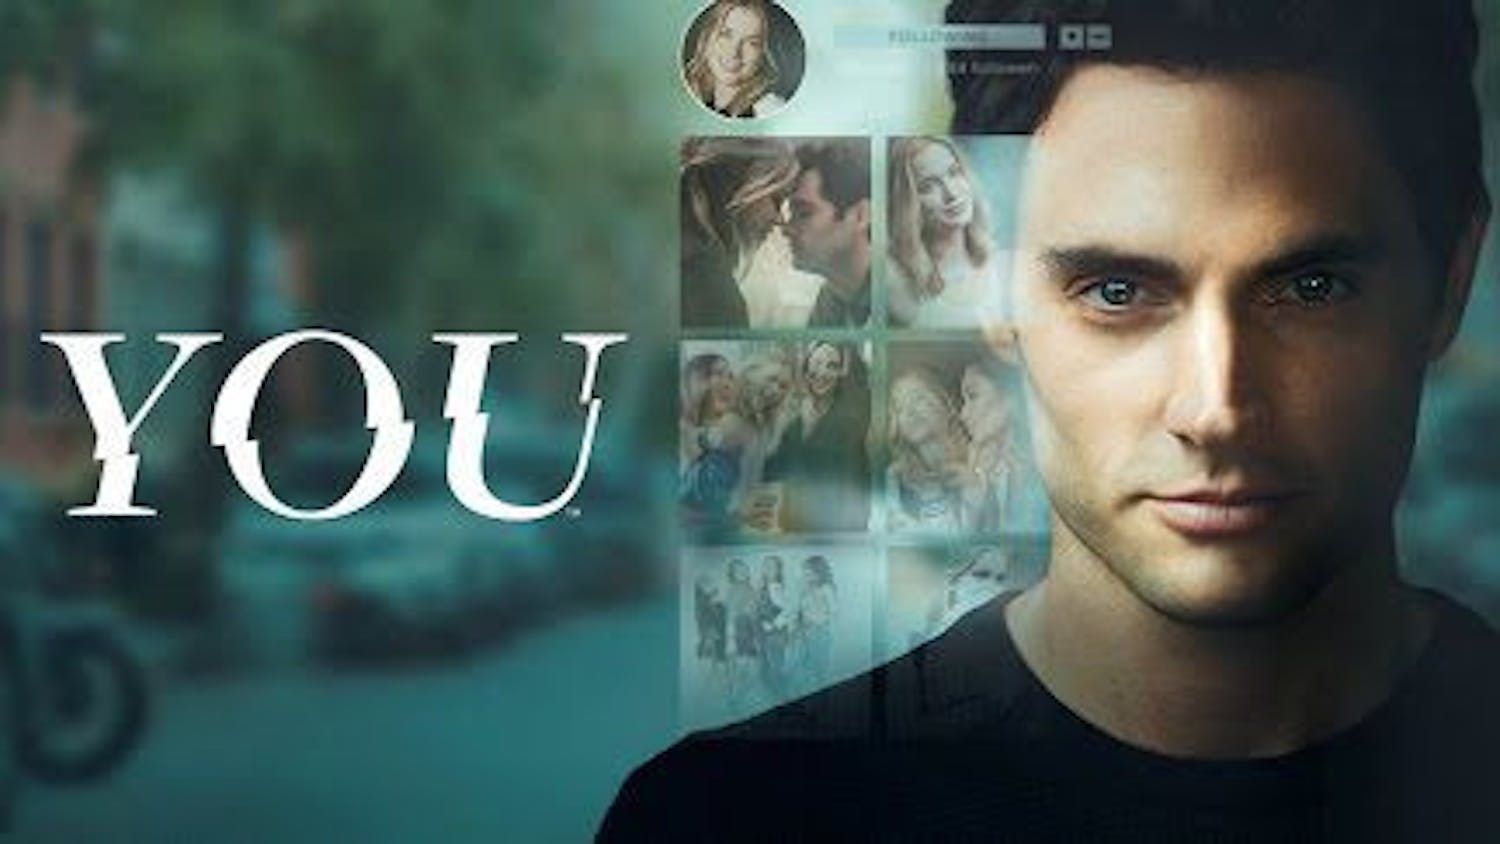 Netflix's new series "YOU" asks:&nbsp;What do you do when the nice guy is actually a psycho?